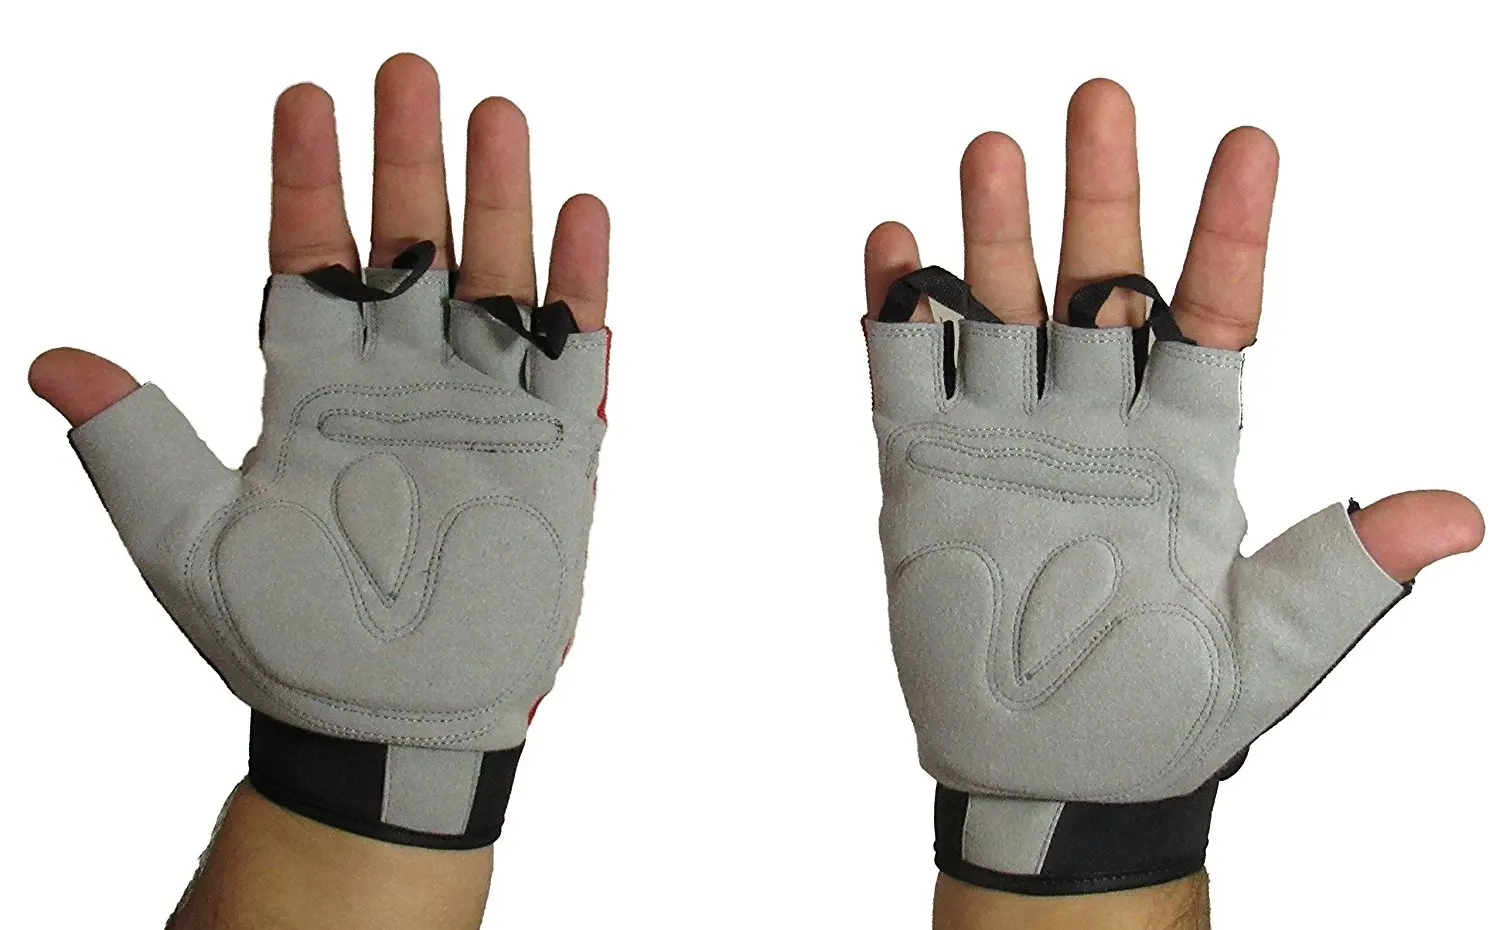 weight lifting gloves padded palm